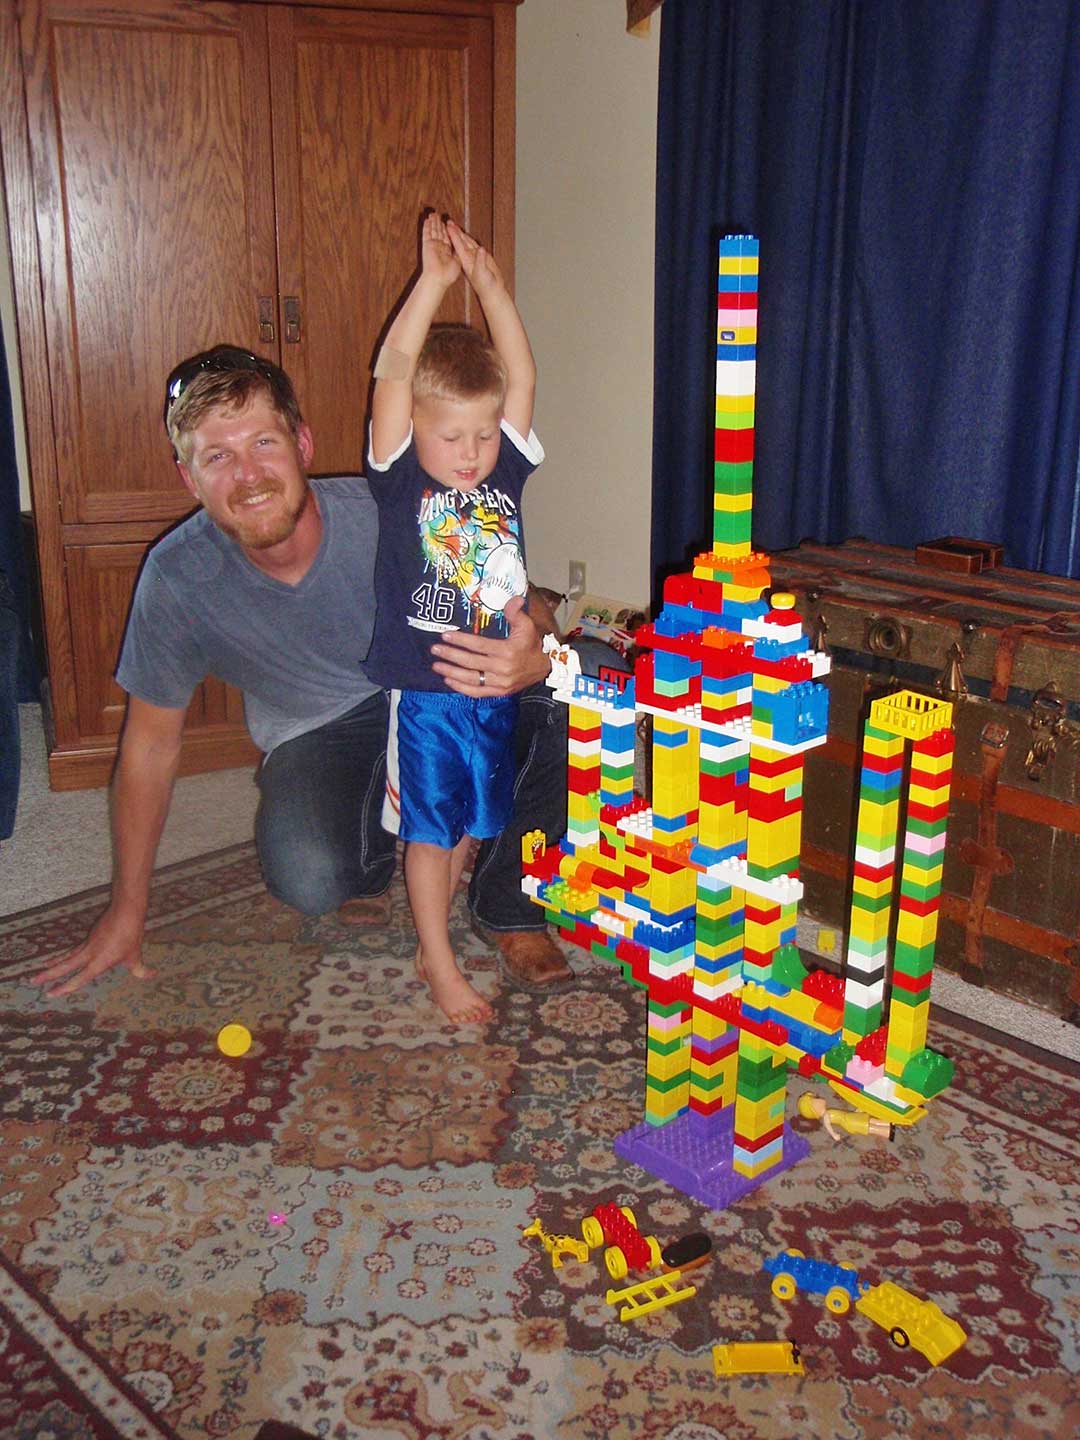 A child and his father building a tower of LEGO bricks.